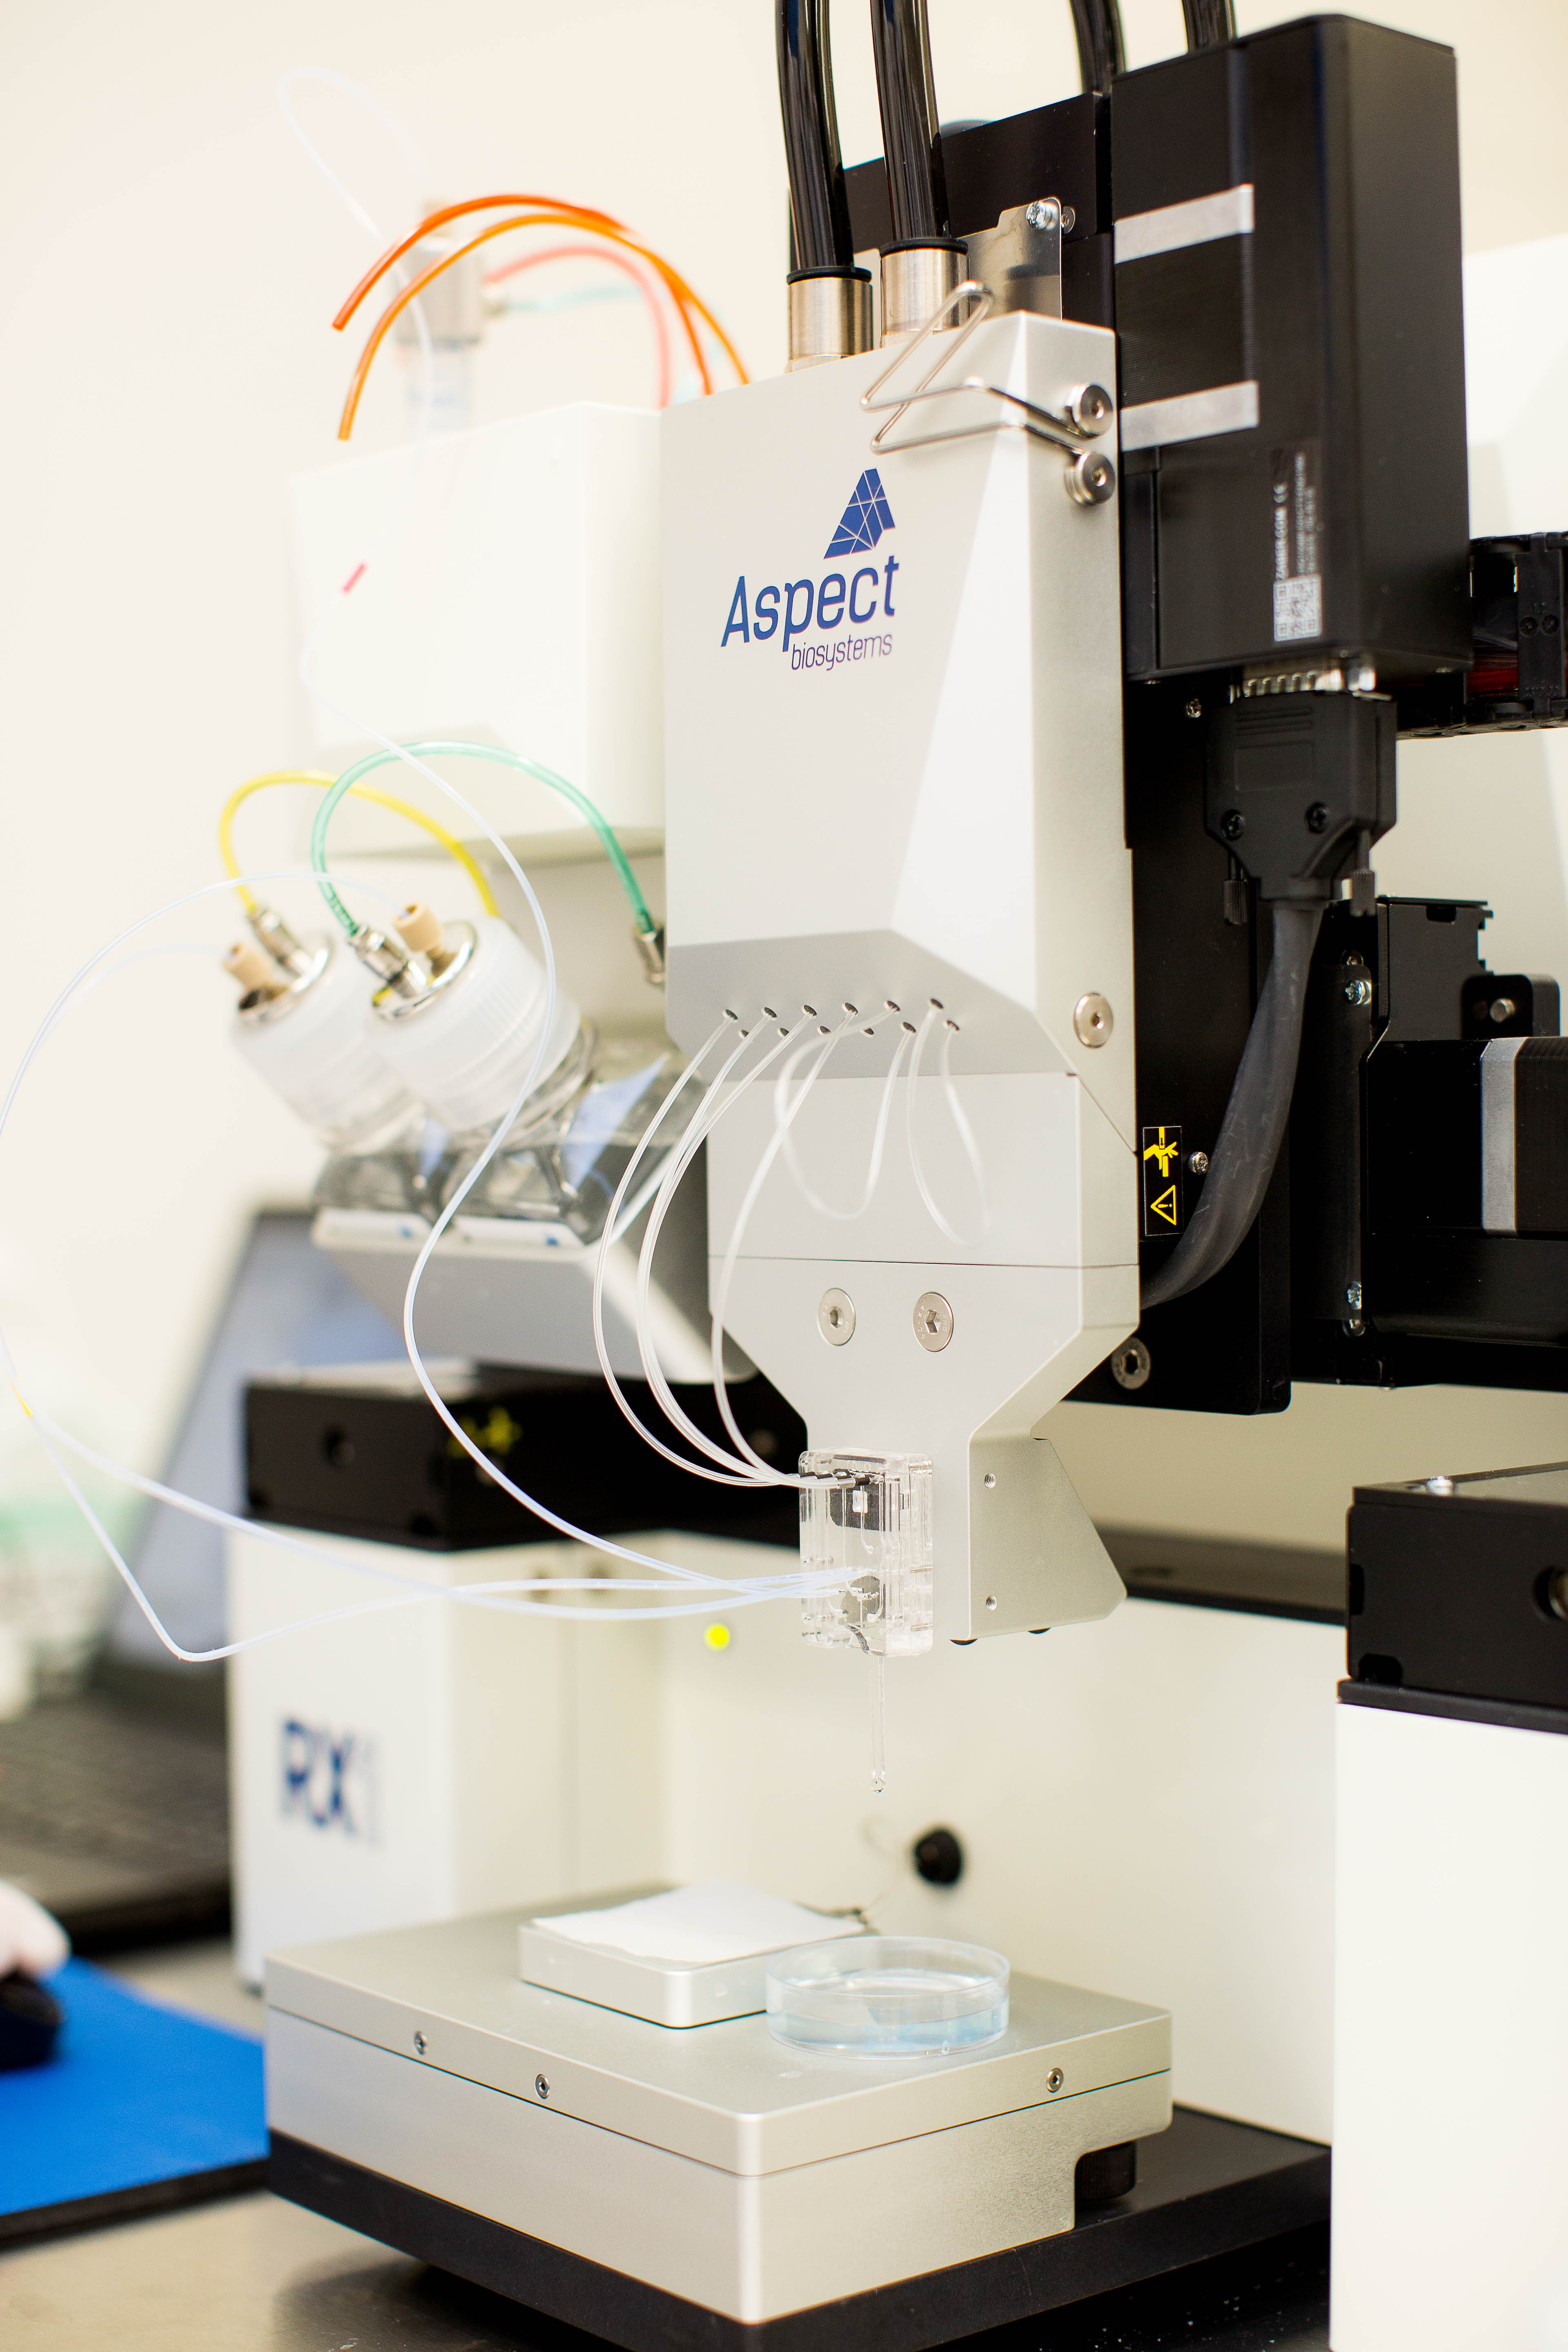 The RX1 bioprinter by Aspect Biosystems will be used in the study. Image via Aspect Biosystems.